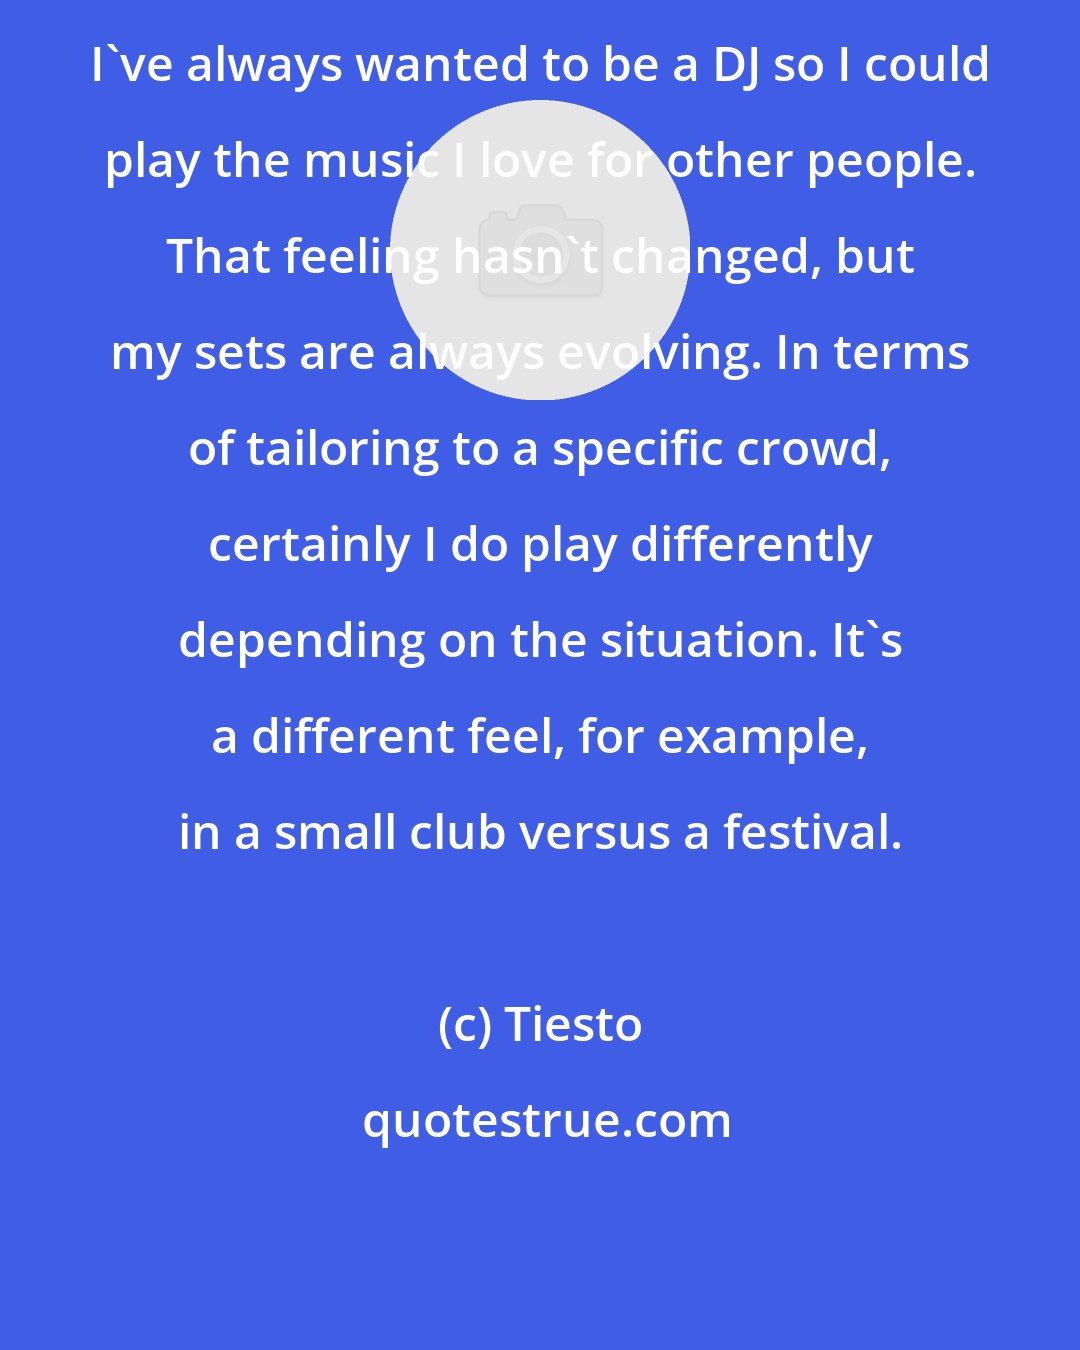 Tiesto: I've always wanted to be a DJ so I could play the music I love for other people. That feeling hasn't changed, but my sets are always evolving. In terms of tailoring to a specific crowd, certainly I do play differently depending on the situation. It's a different feel, for example, in a small club versus a festival.